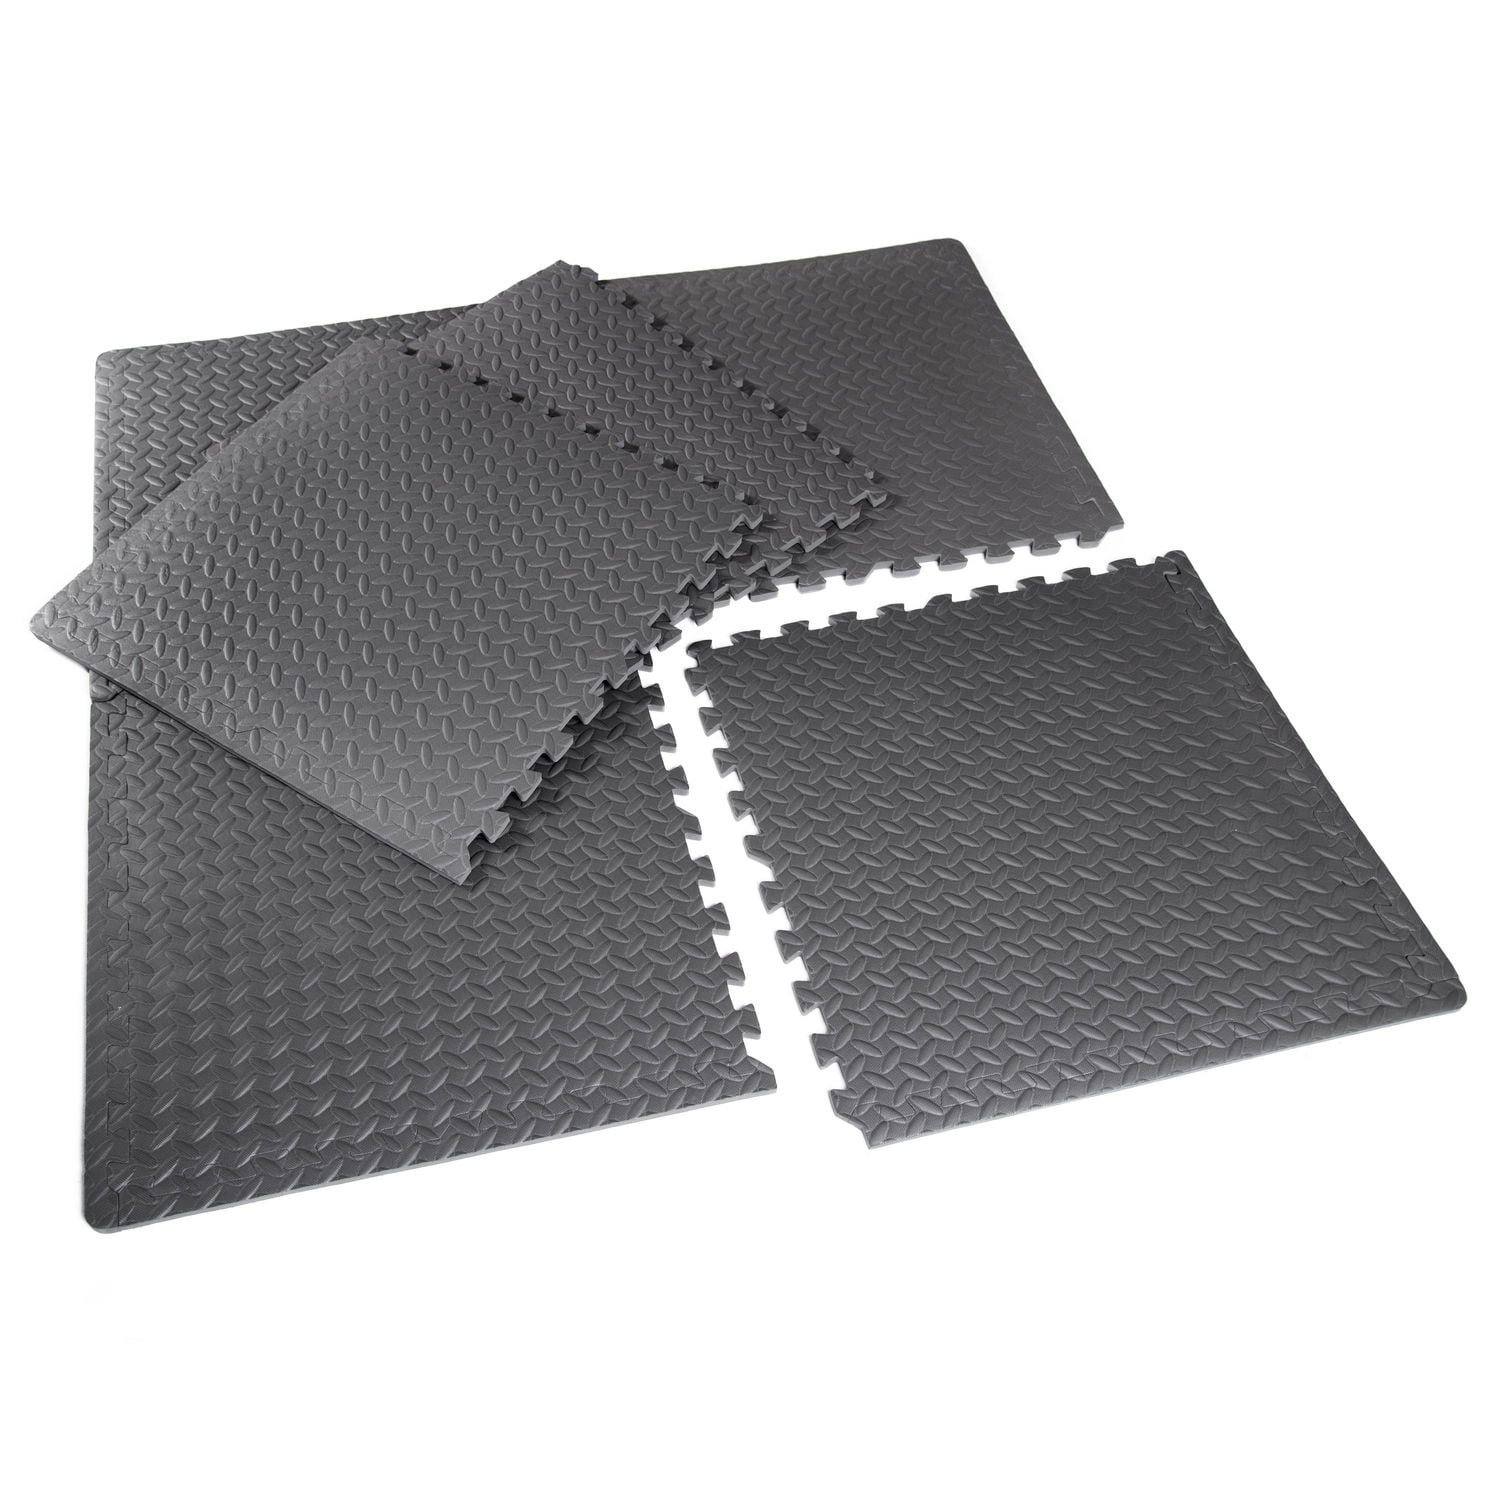 CAP Barbell High Impact Flooring Puzzle Exercise Mat, 6 Pieces, 1